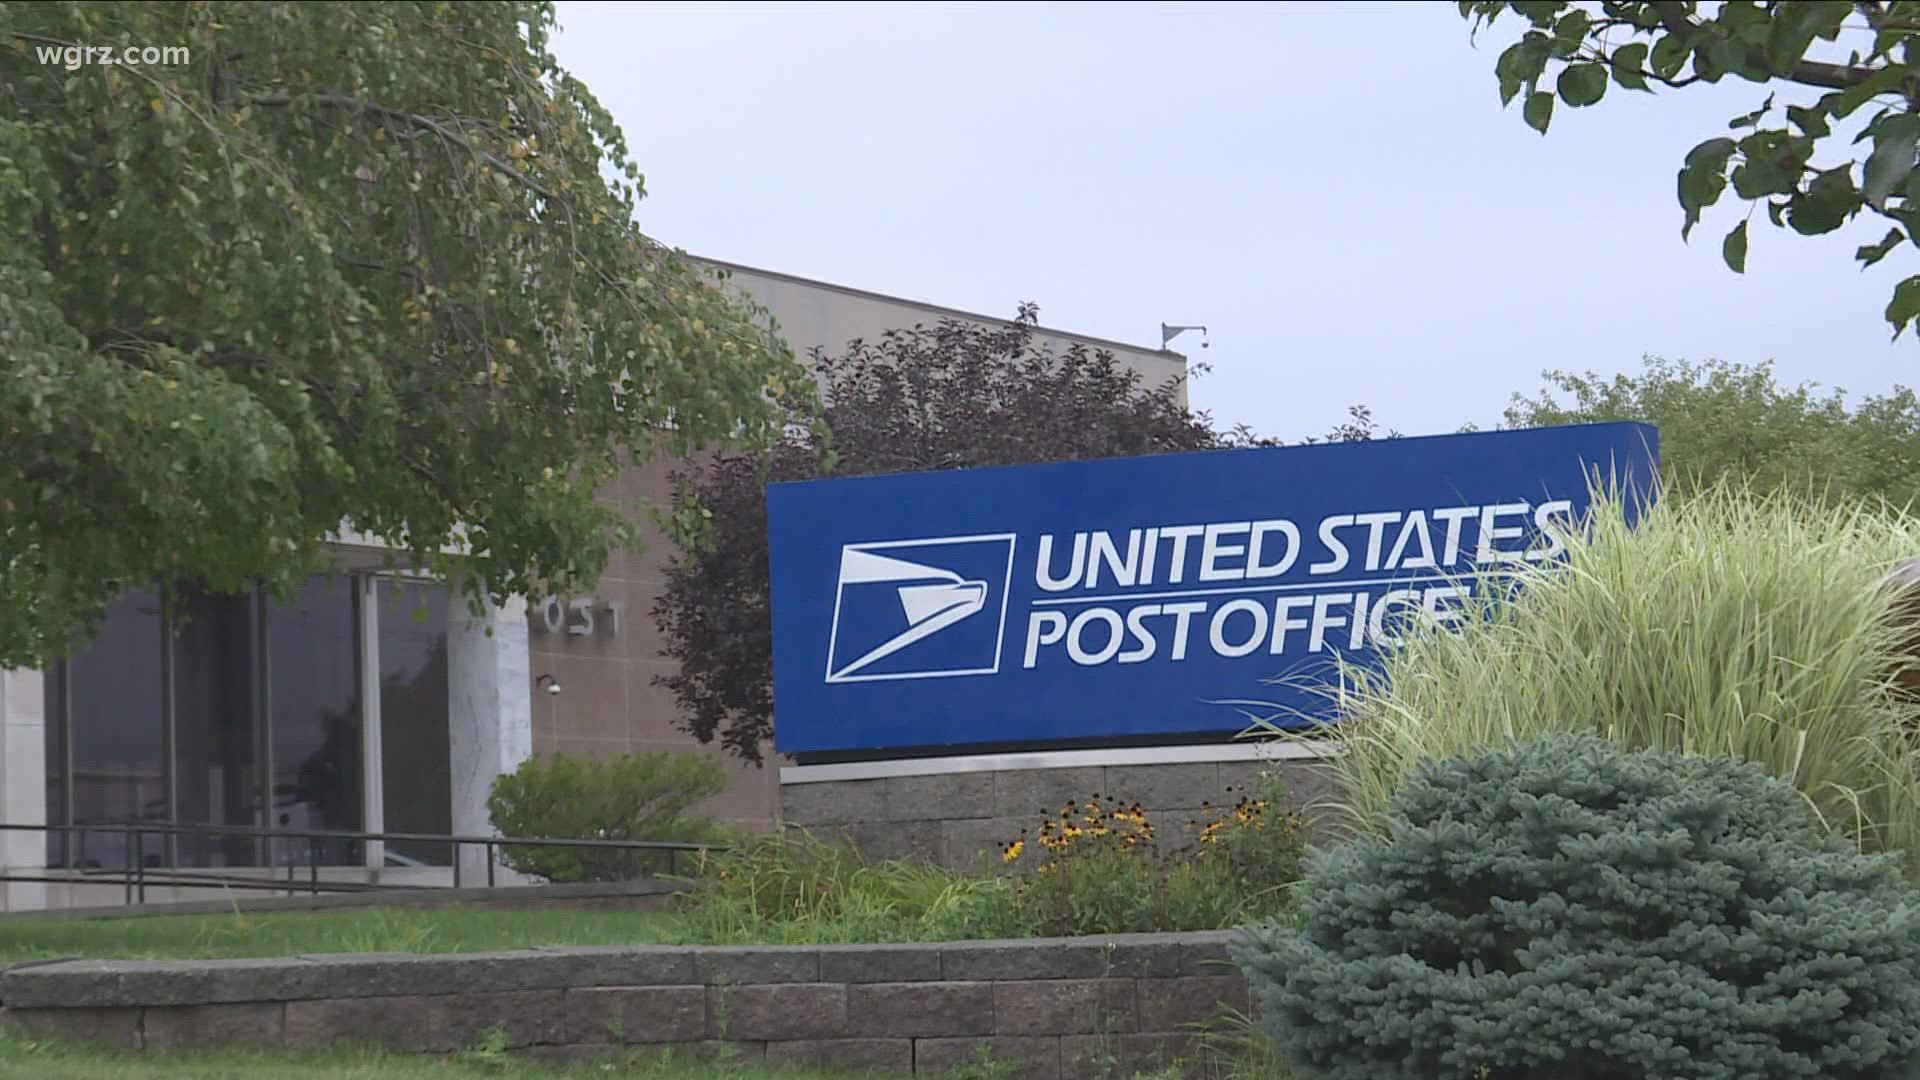 The bill would give people access to services such as savings and checking accounts, debit cards, low-fee ATMs, and more right at the post office.